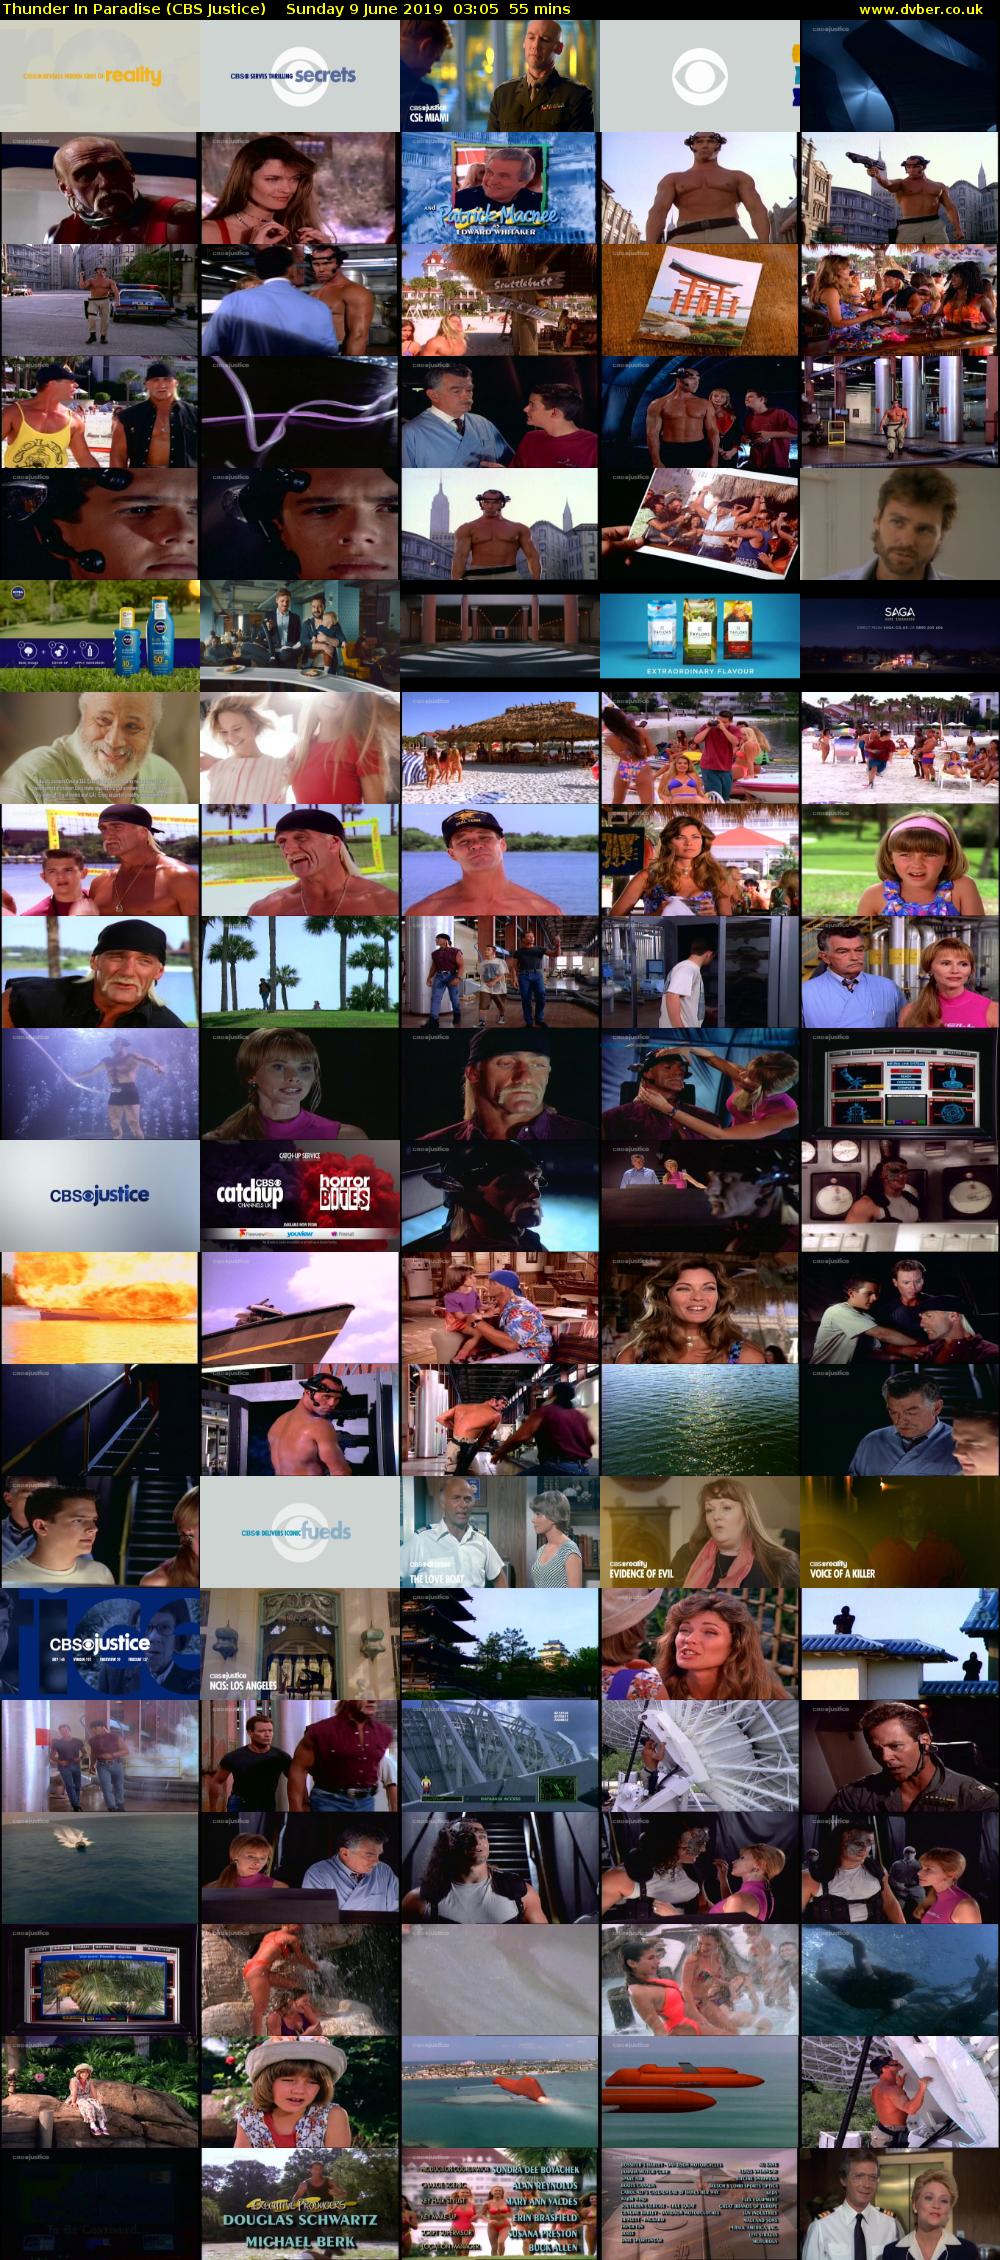 Thunder In Paradise (CBS Justice) Sunday 9 June 2019 03:05 - 04:00